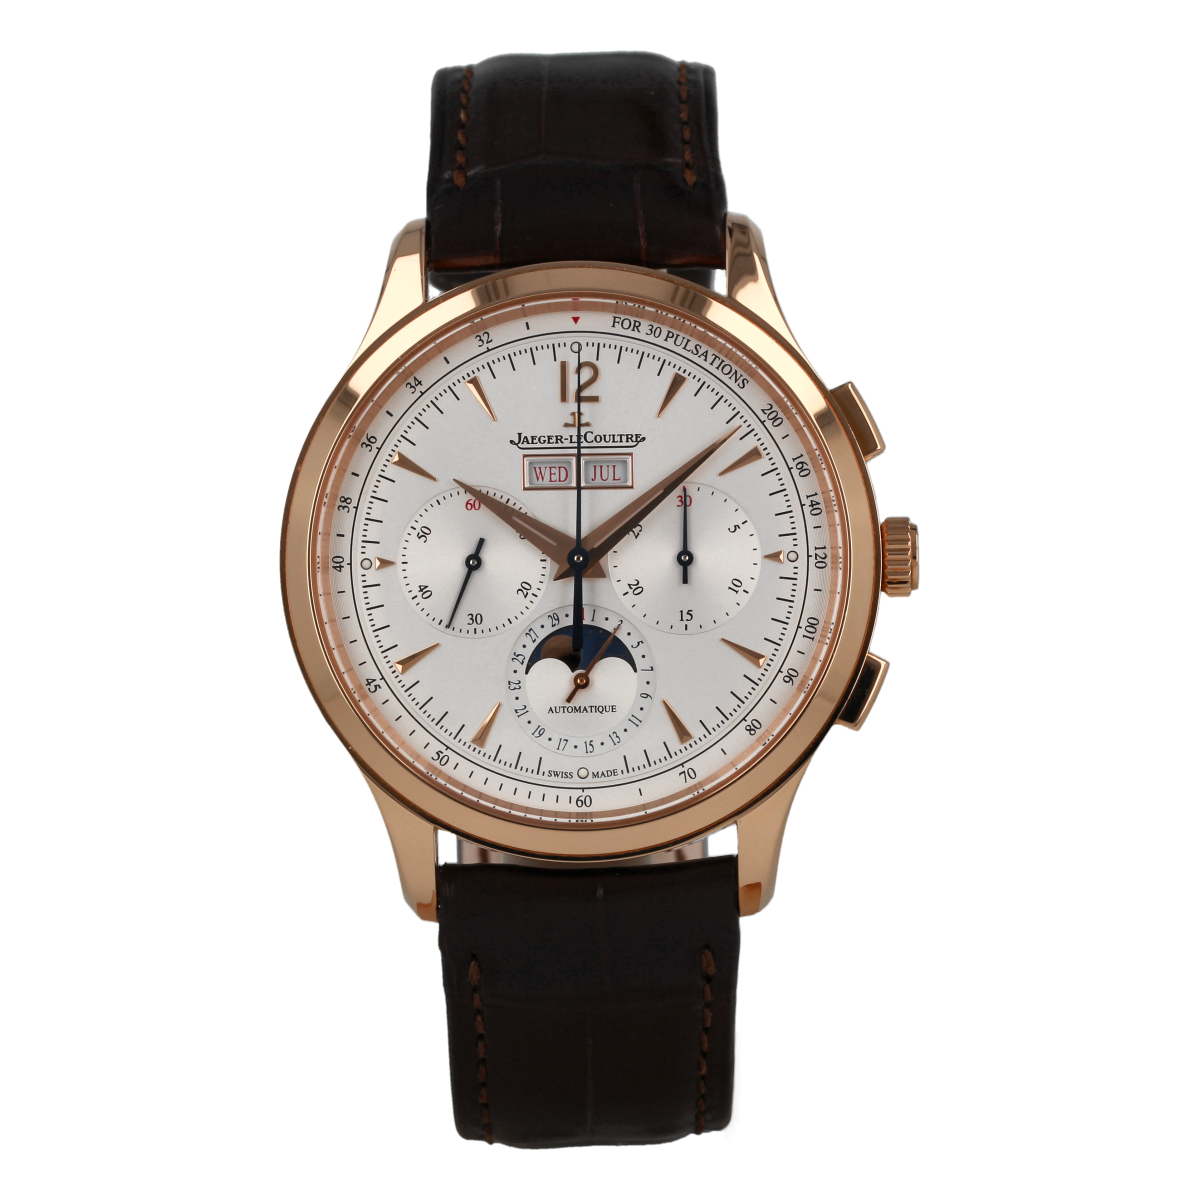 Jaeger-LeCoultre Master Control Chronograph Calendar Pink Gold | Buy pre-owned Jaeger-LeCoultre watch